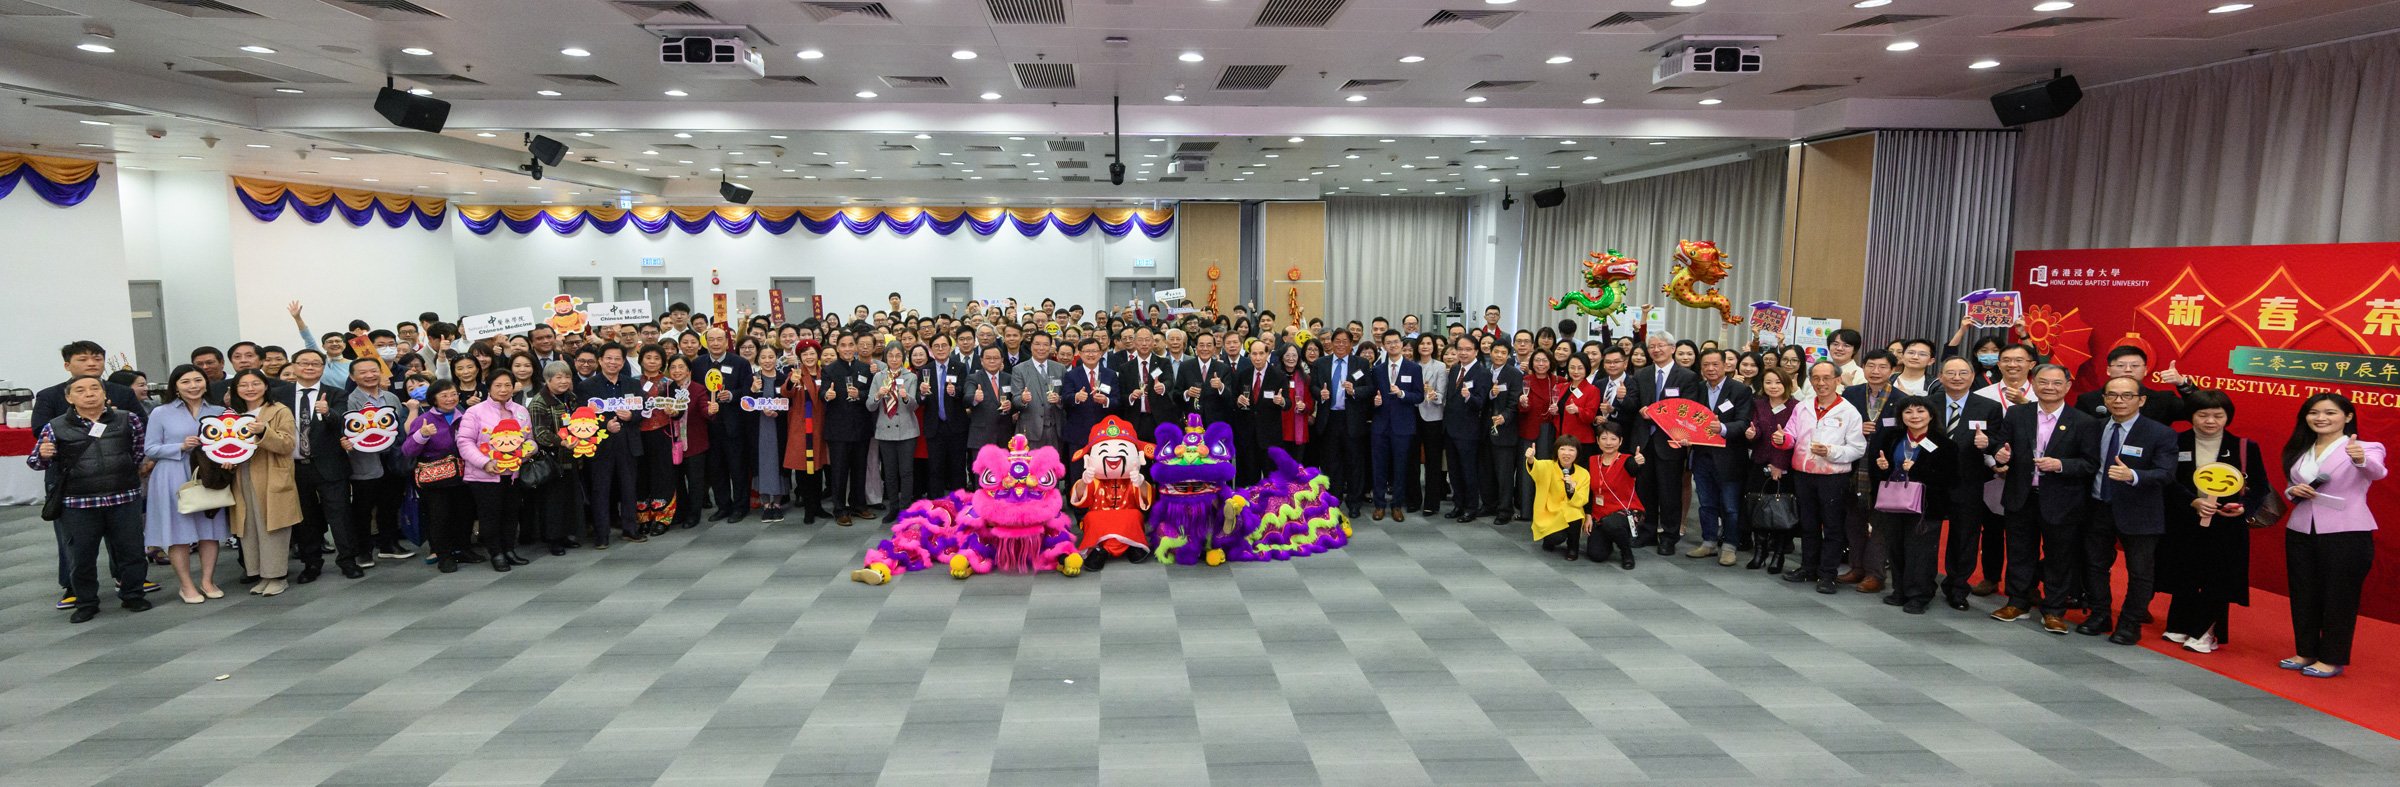 Uniting Chinese Medicine Leaders and Talents: Over 200 Chinese medicine representatives gather to celebrate Chinese New Year at HKBU